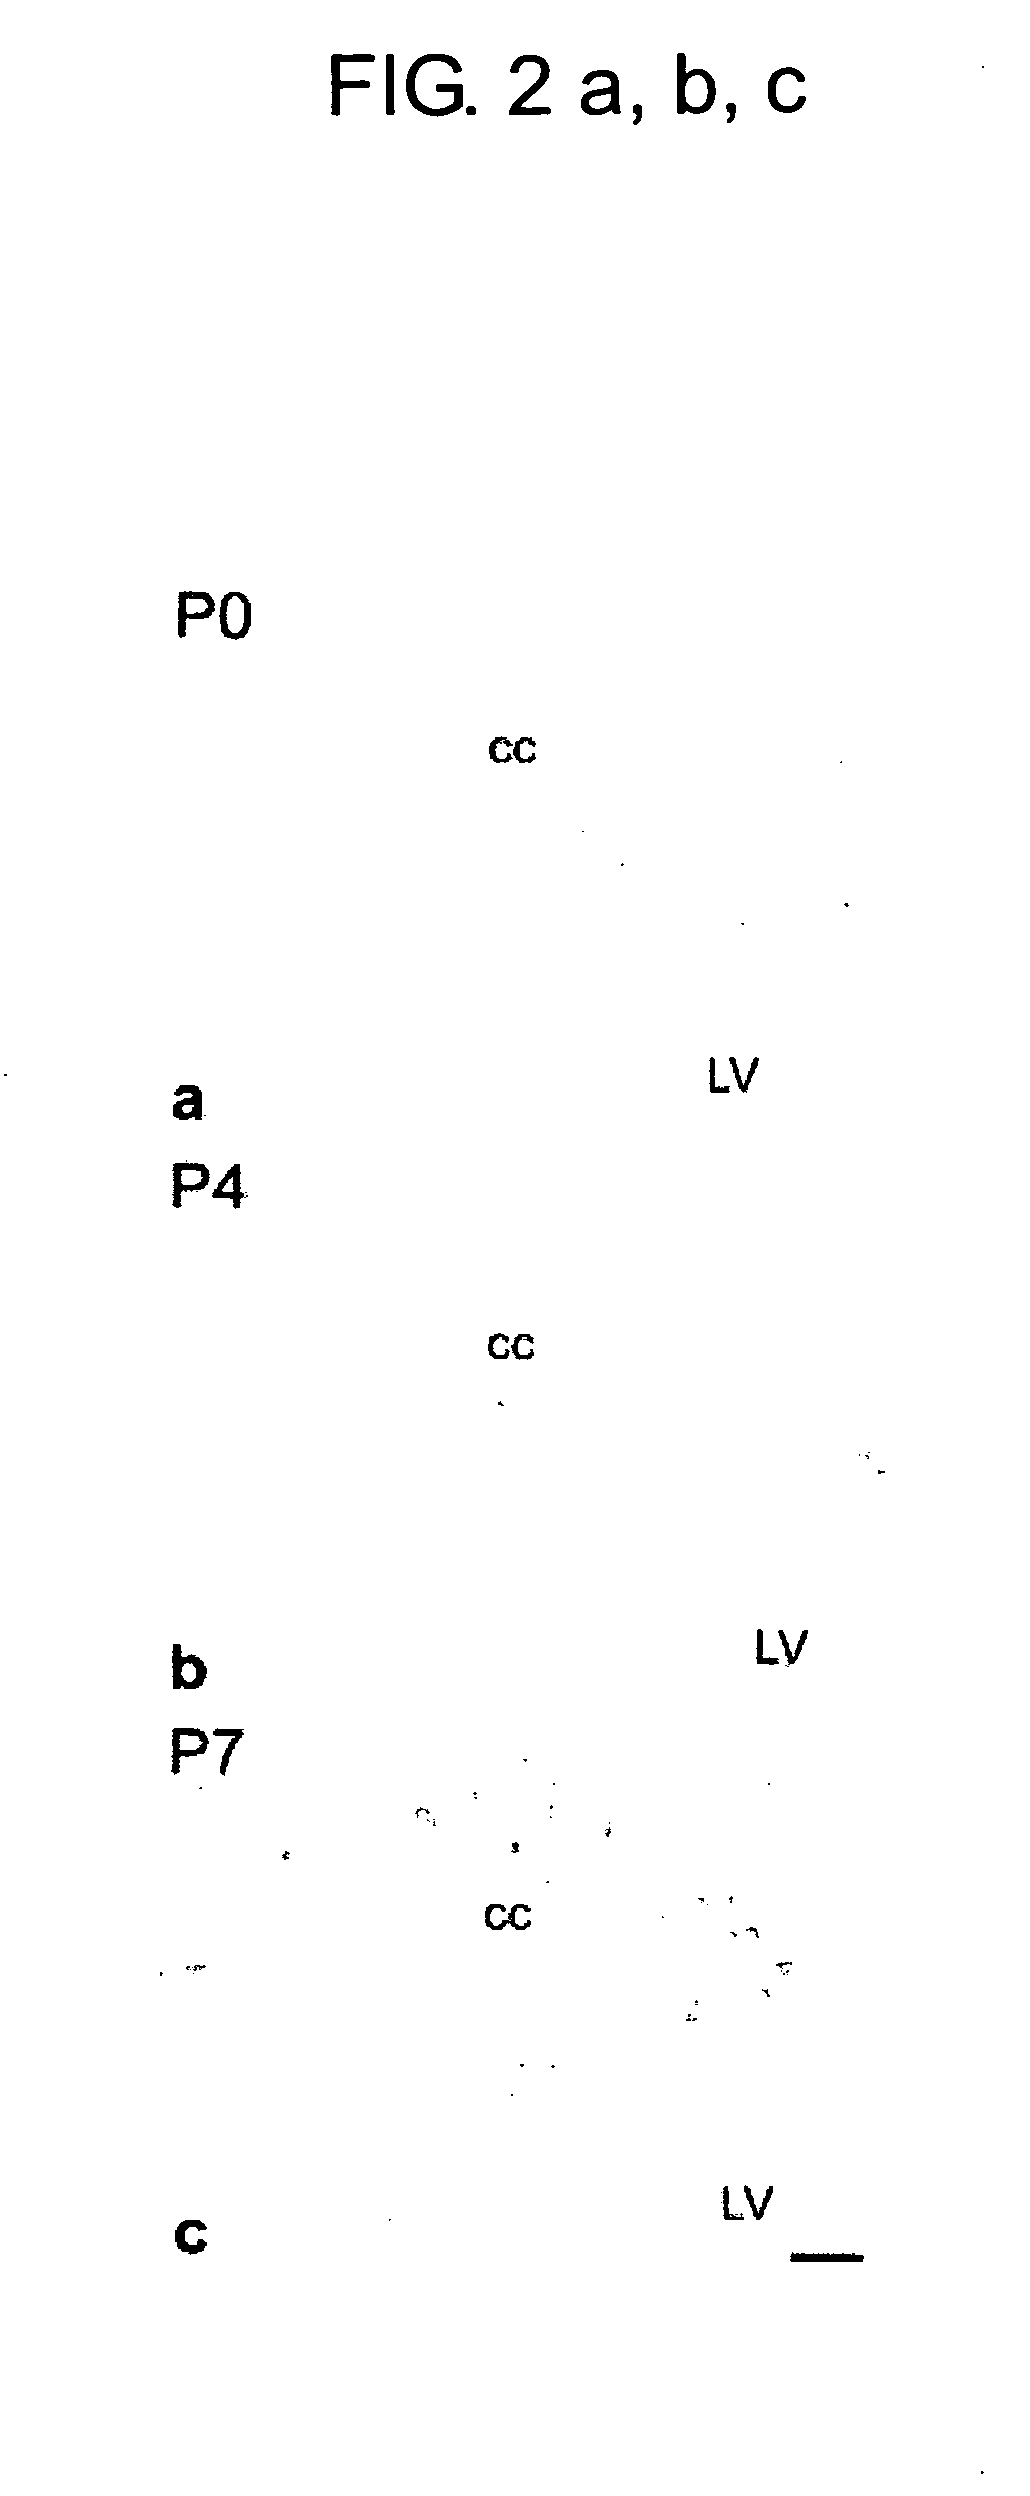 Medicinal compositions containing fc receptor gamma-chain activator